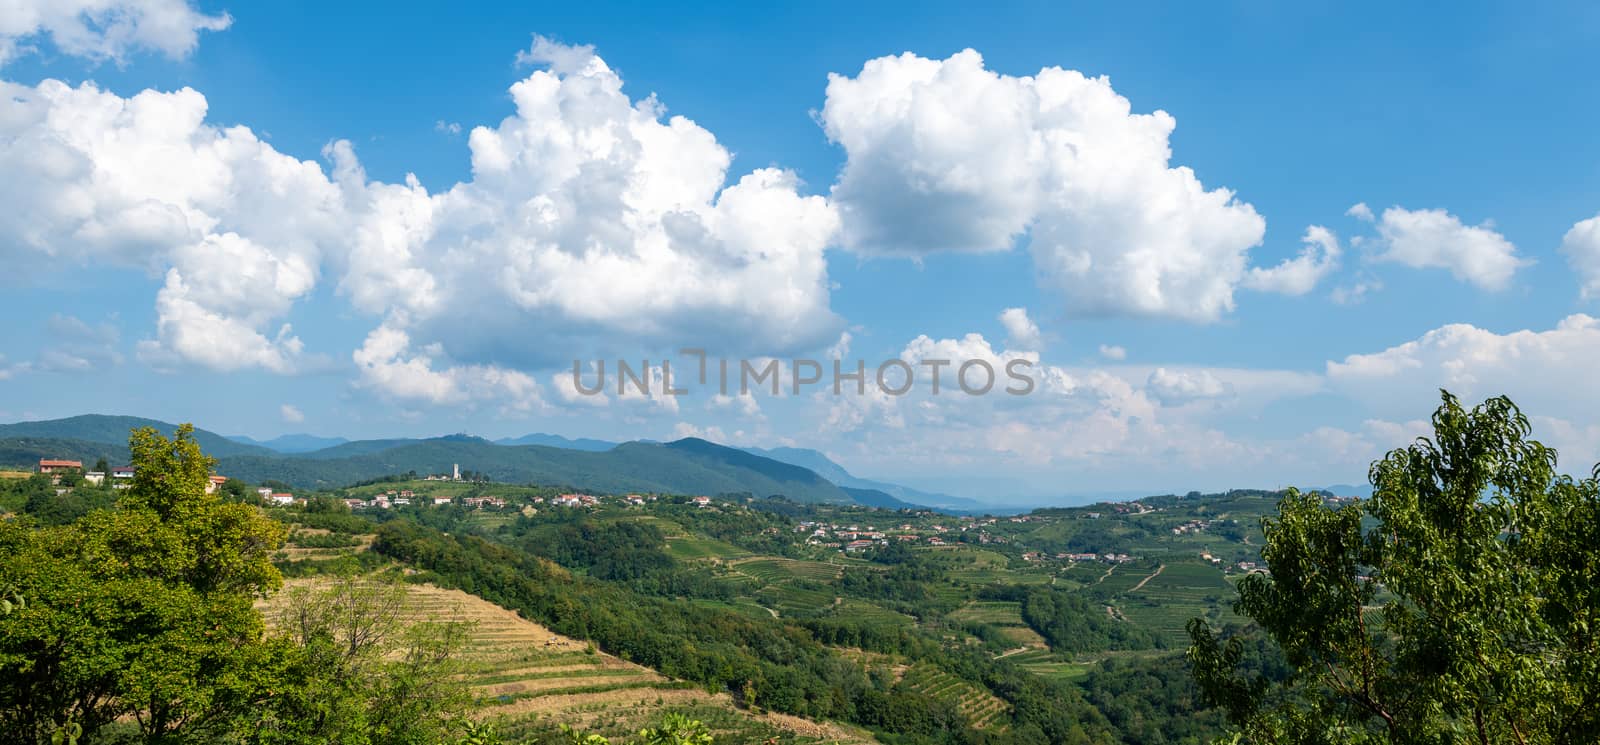 Village of Kojsko, Sloveniain famous wine growing region of Goriska Brda, lit by sun and clouds in background, holy mountain with church above Nova Gorica in background by asafaric